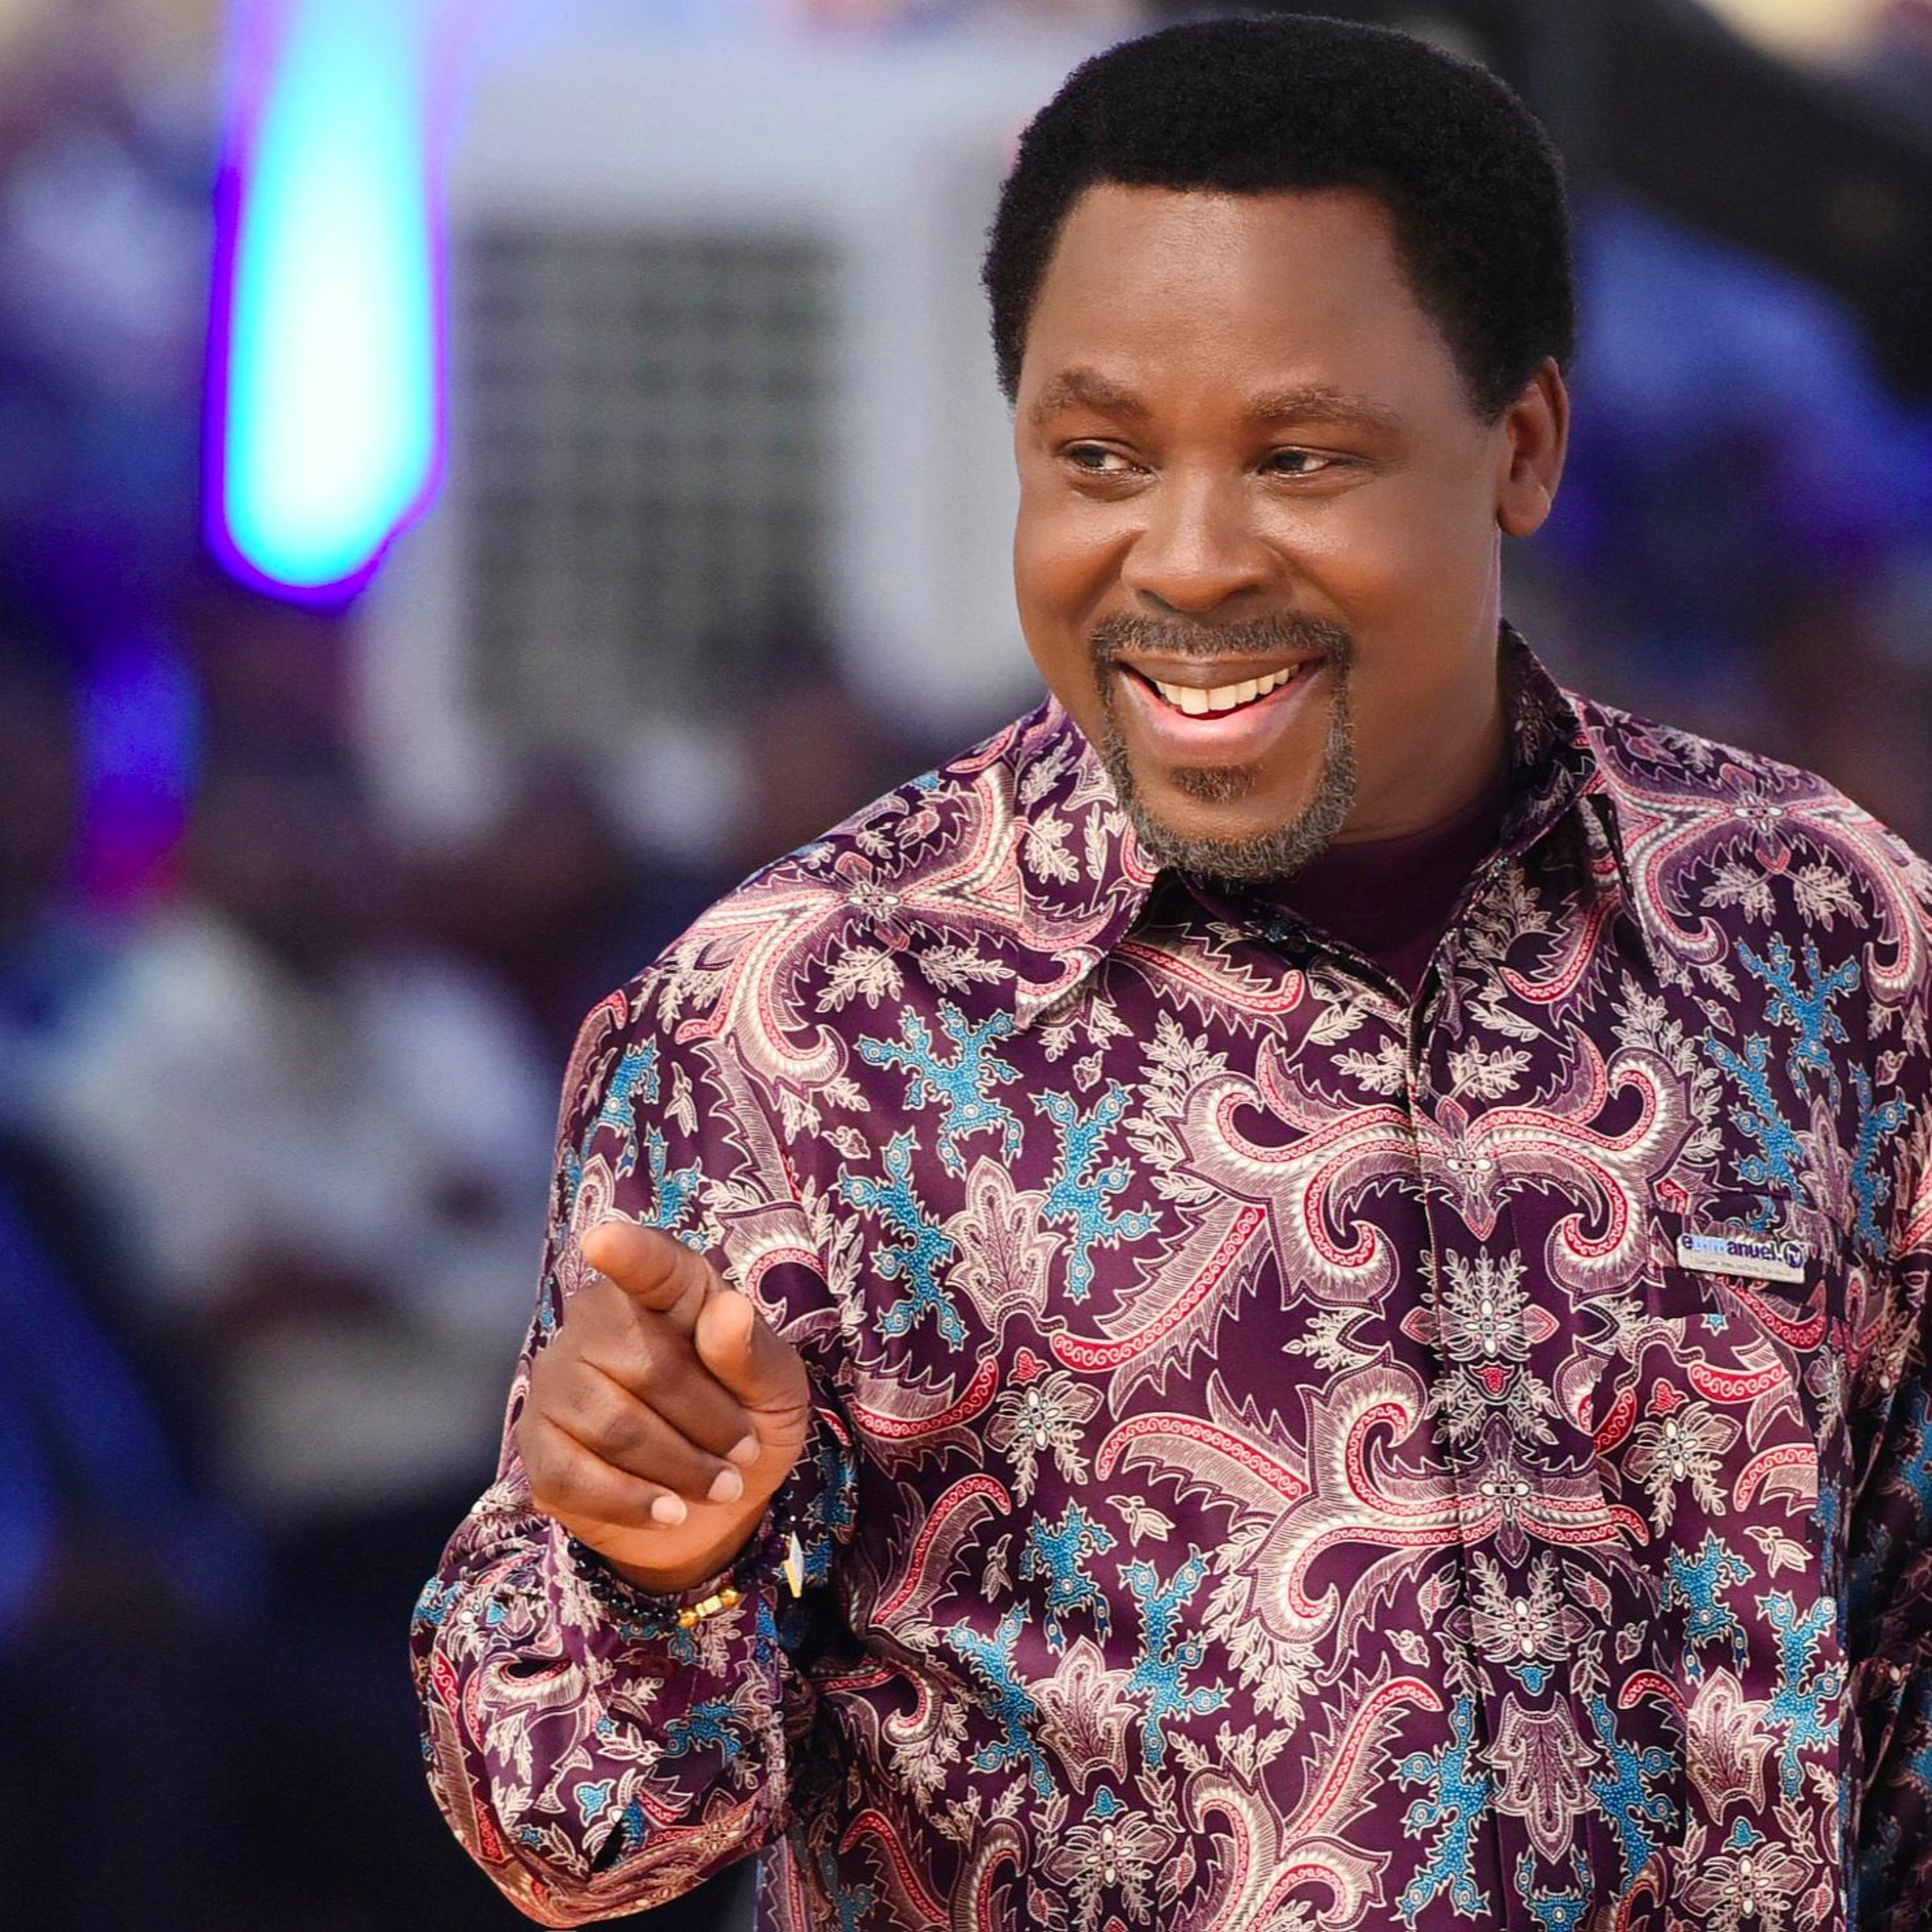 TB Joshua At The Altar- 3 March 2019